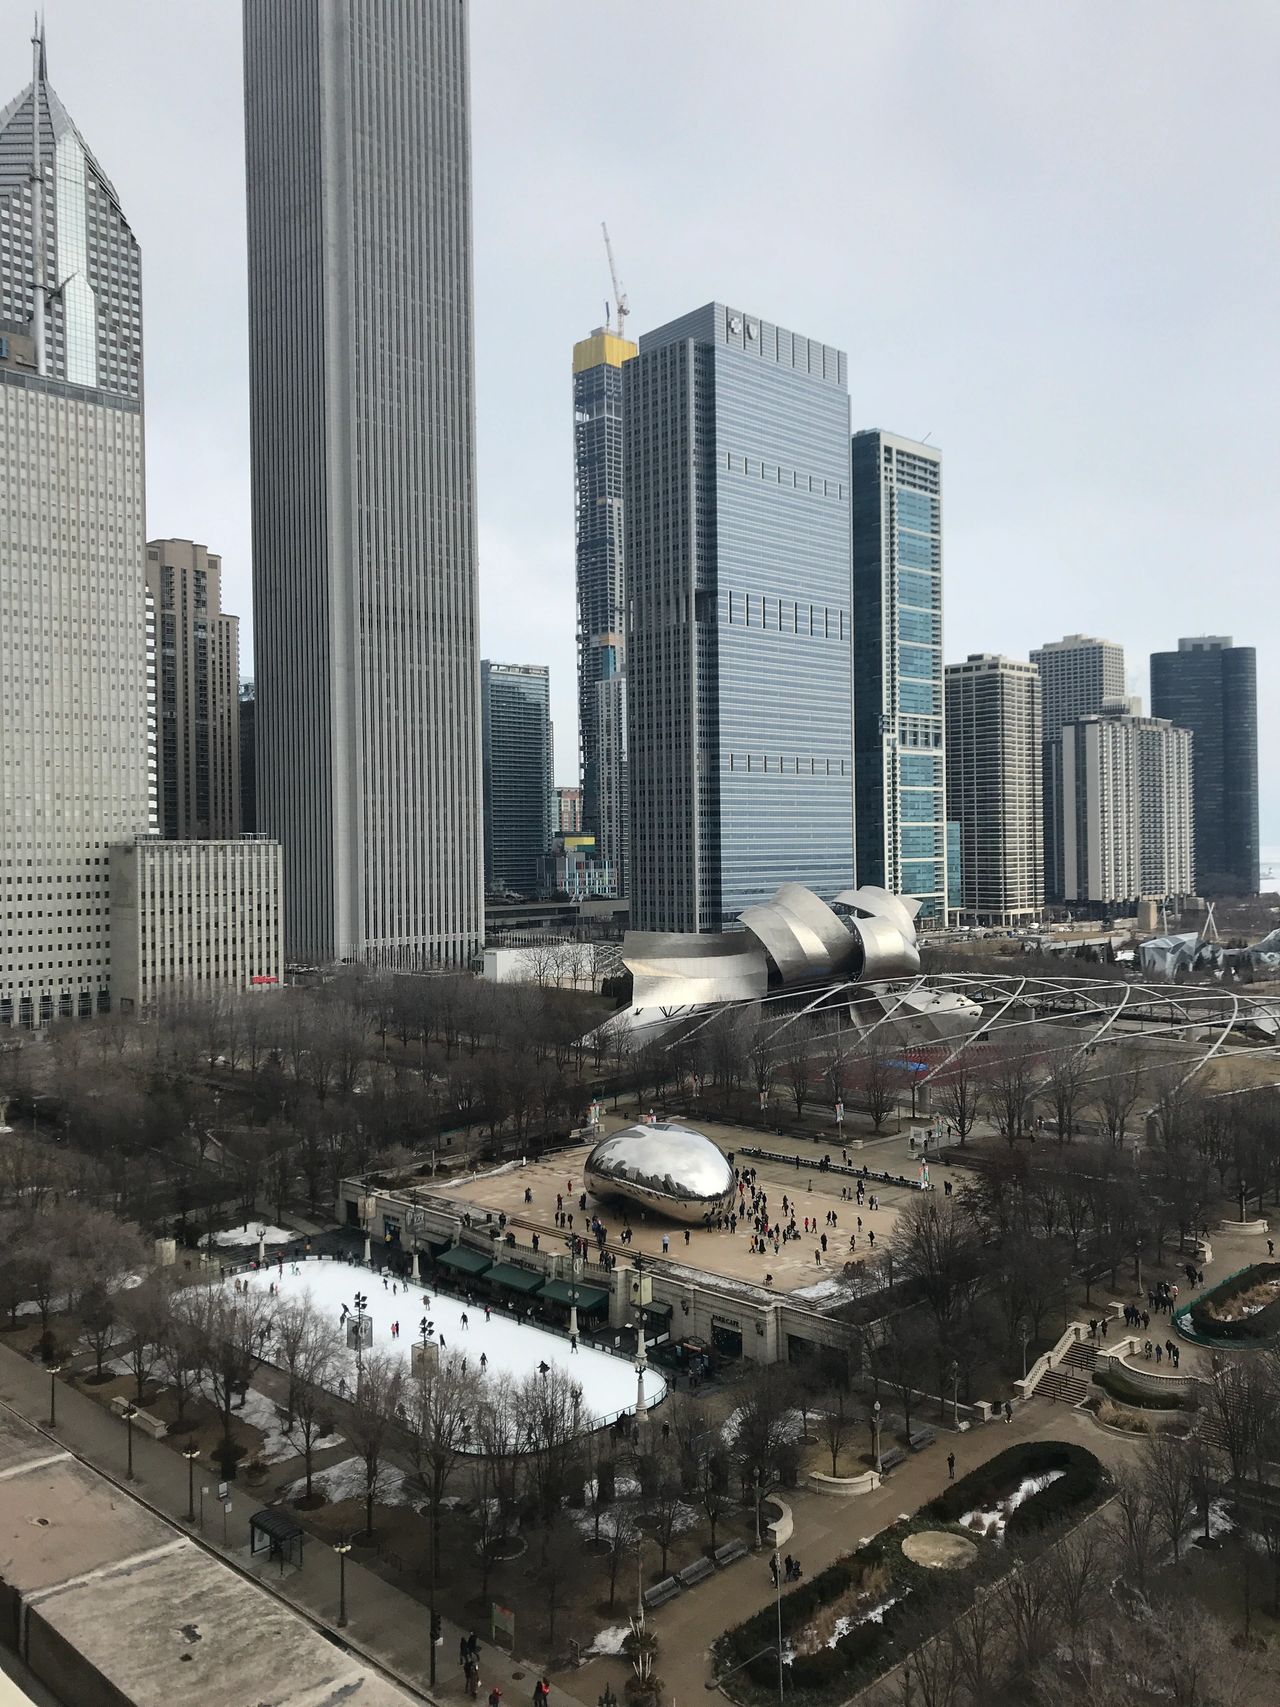 The view of Millennium Park from the rooftop